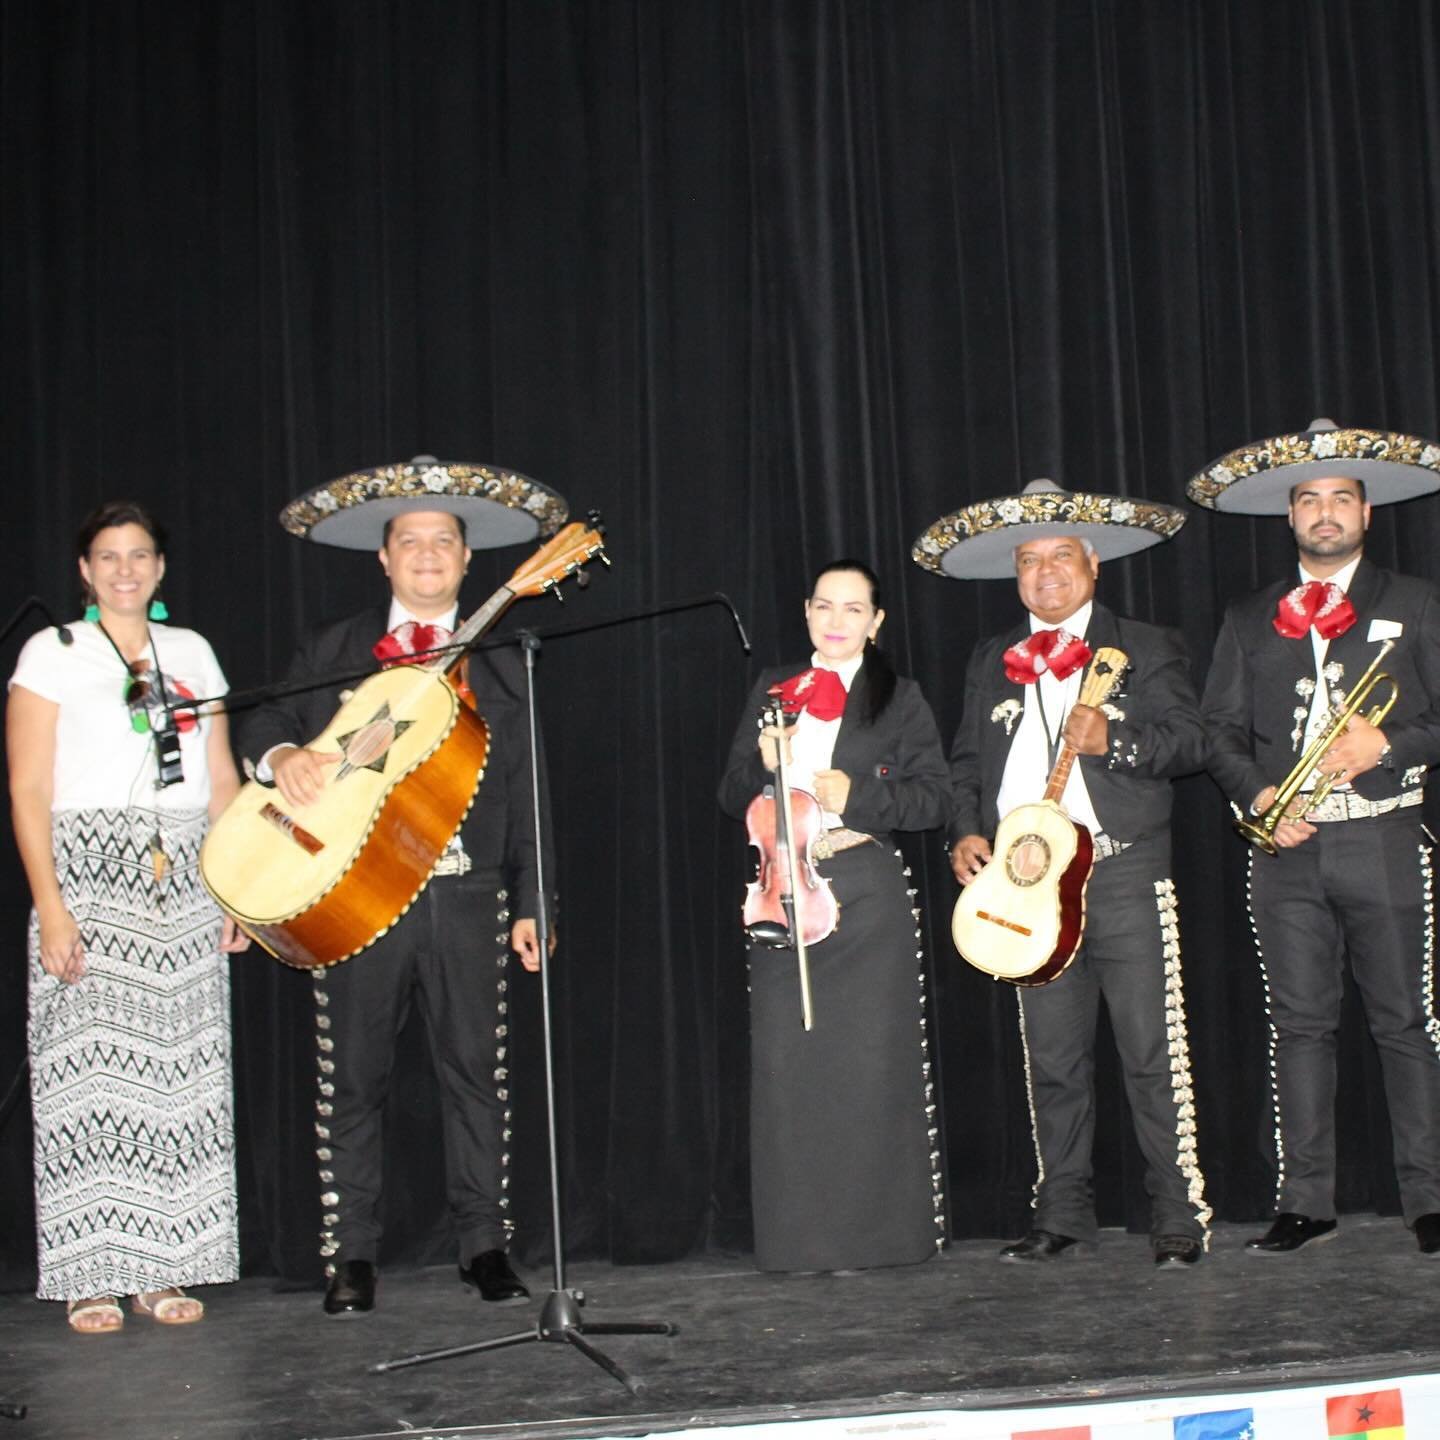 🎉 Saint Mark's Heritage Day! 🎶✨ Let's celebrate each of our families cultures together! 

We were thrilled to welcome a special Mariachi group to serenade us with their vibrant tunes, adding a dash of Mexican flair to our festivities. 

#SMES #SMES